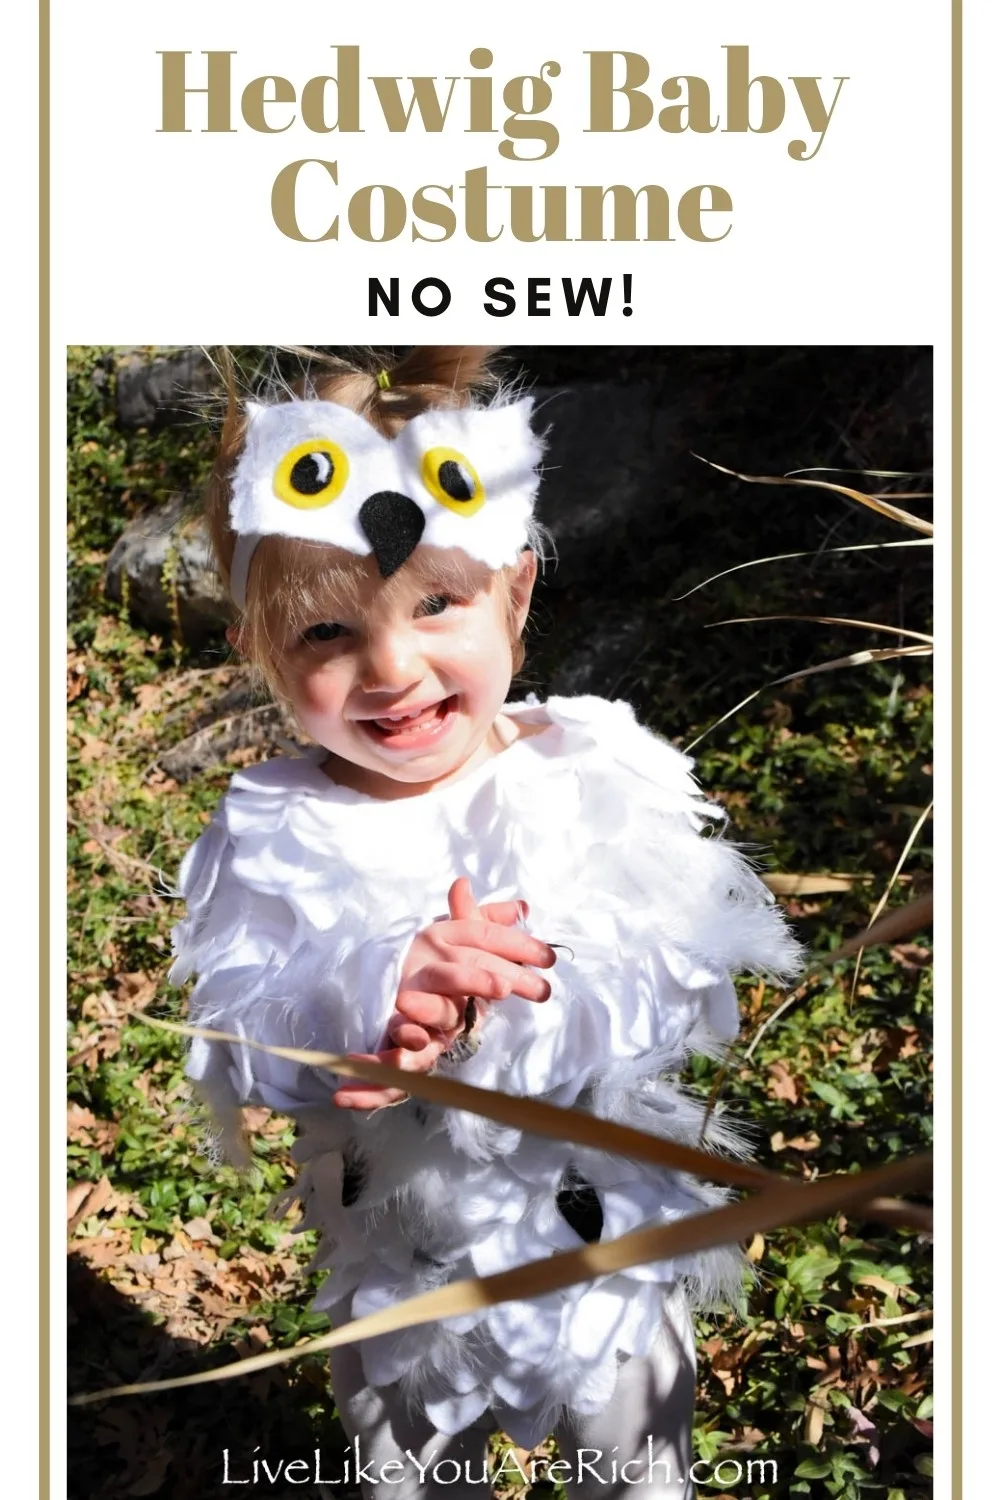 This is a great Hedwig no sew baby costume. It was easy, quick, inexpensive, and turned out very customized and cute. I also appreciated the fact that my baby didn’t have to hold anything to wear it. The costume is similar to what she normally wears daily, so it felt natural and easy for her to walk around in. #halloweencostume #harrypotter #hedwigbabyowlcostume